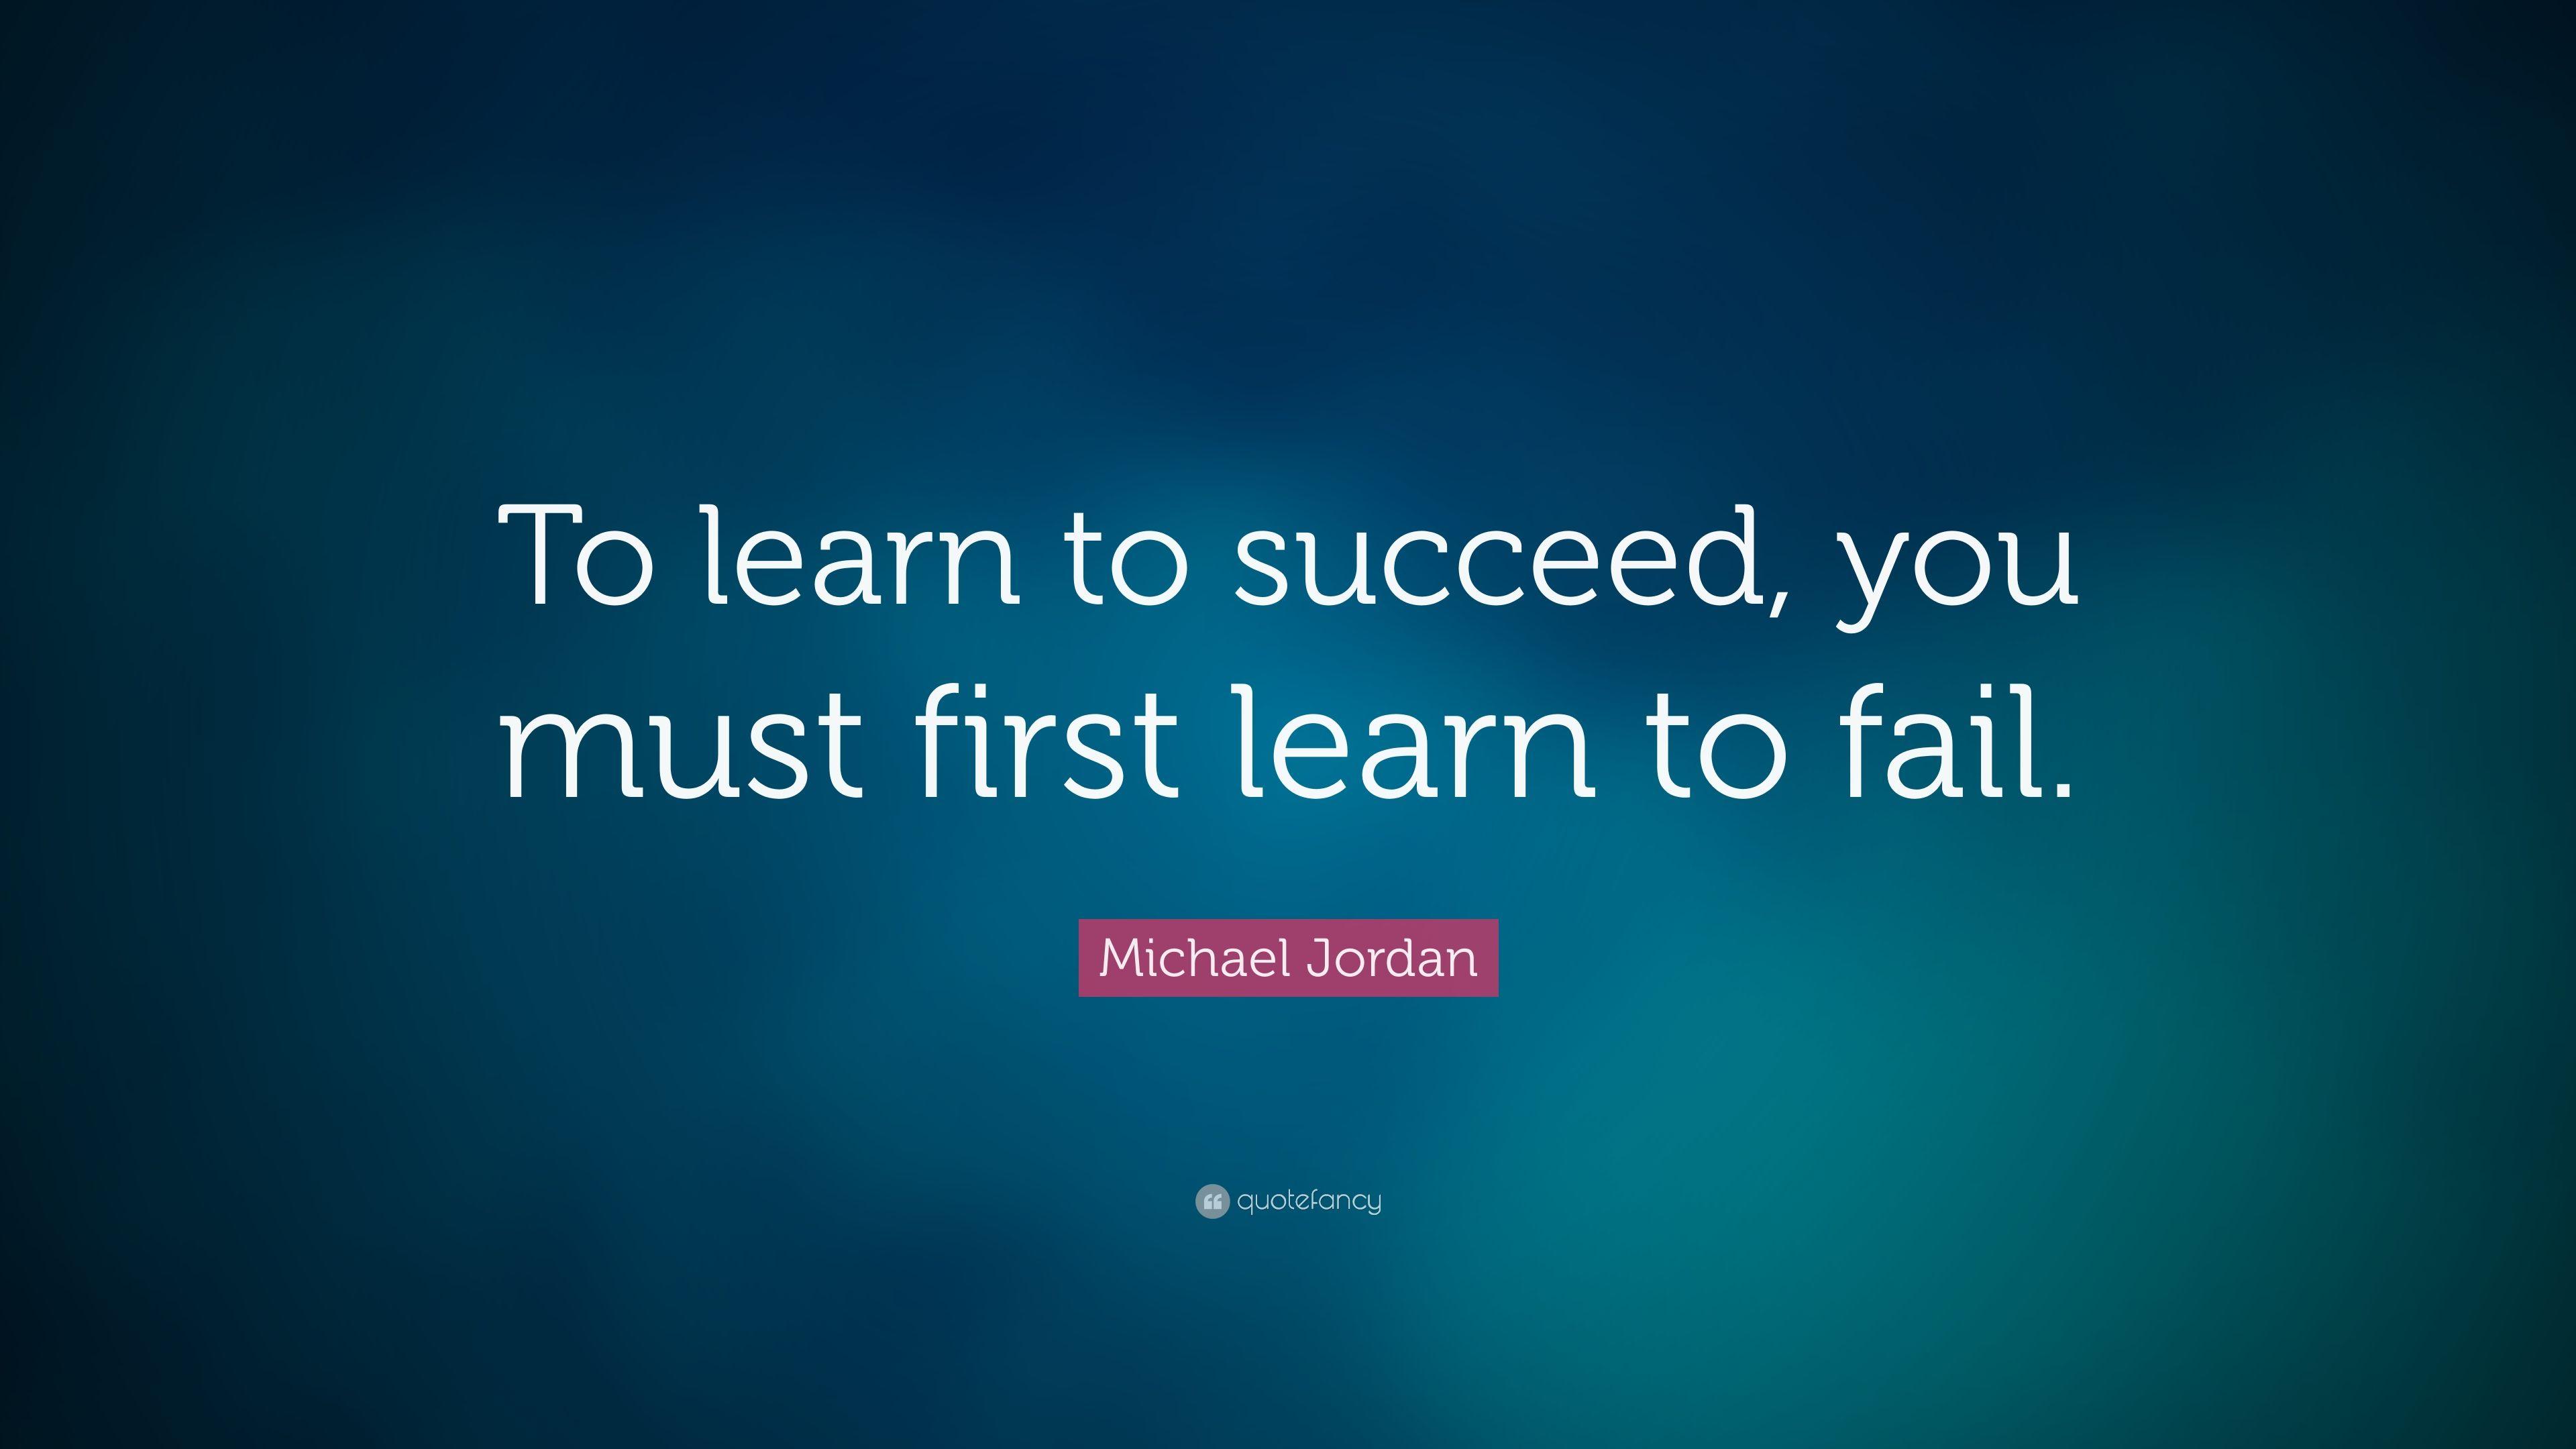 Michael Jordan Quote: “To learn to succeed, you must first learn